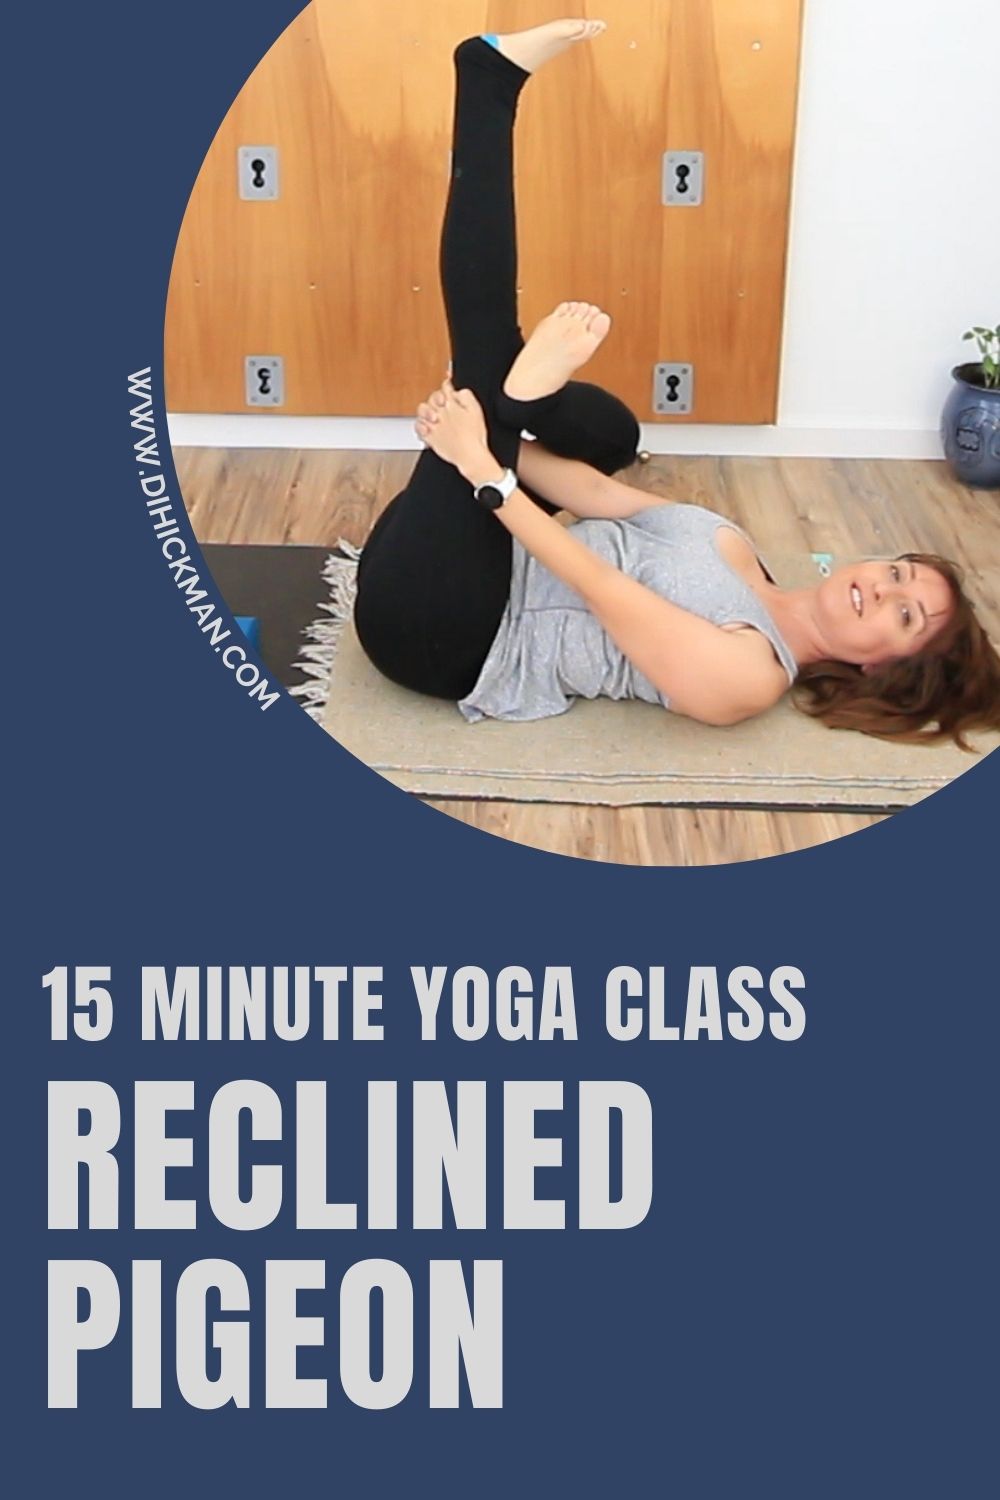 15 minute yoga class reclined pigeon